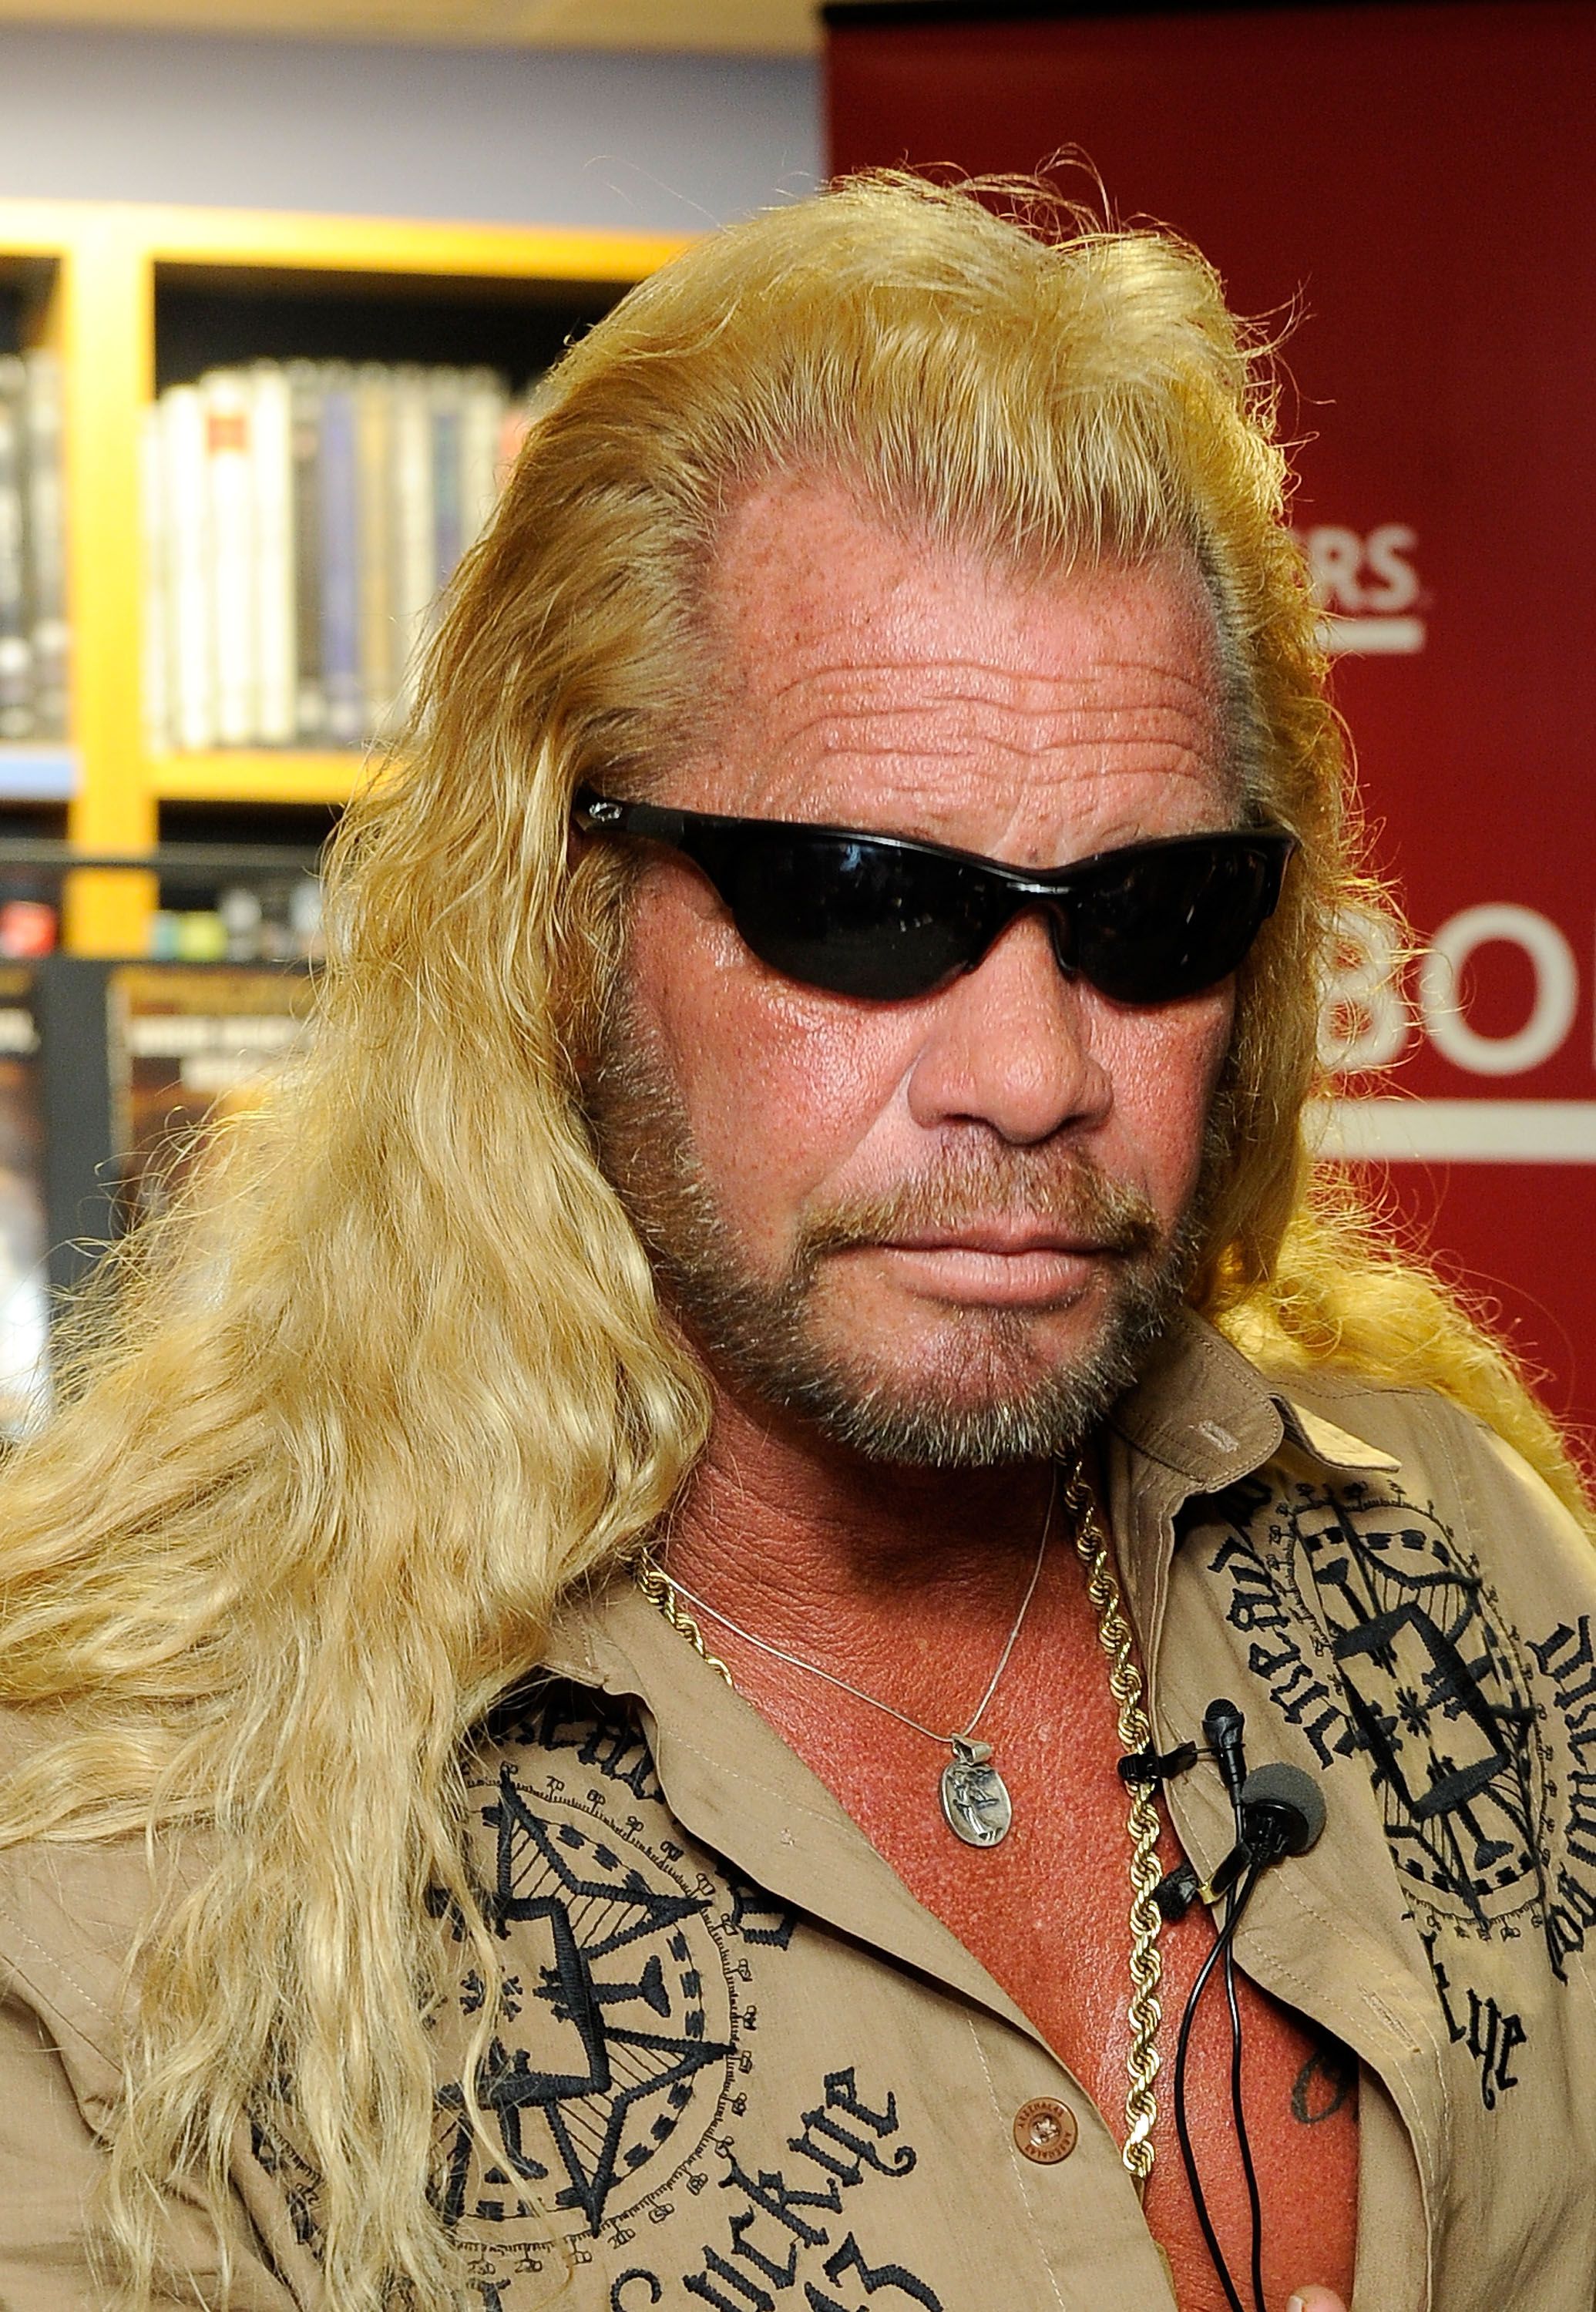 Duane Chapman during his his book promotion "When Mercy Is Shown, Mercy Is Given" at Borders Wall Street on March 19, 2010 in New York City. | Source: Getty Images